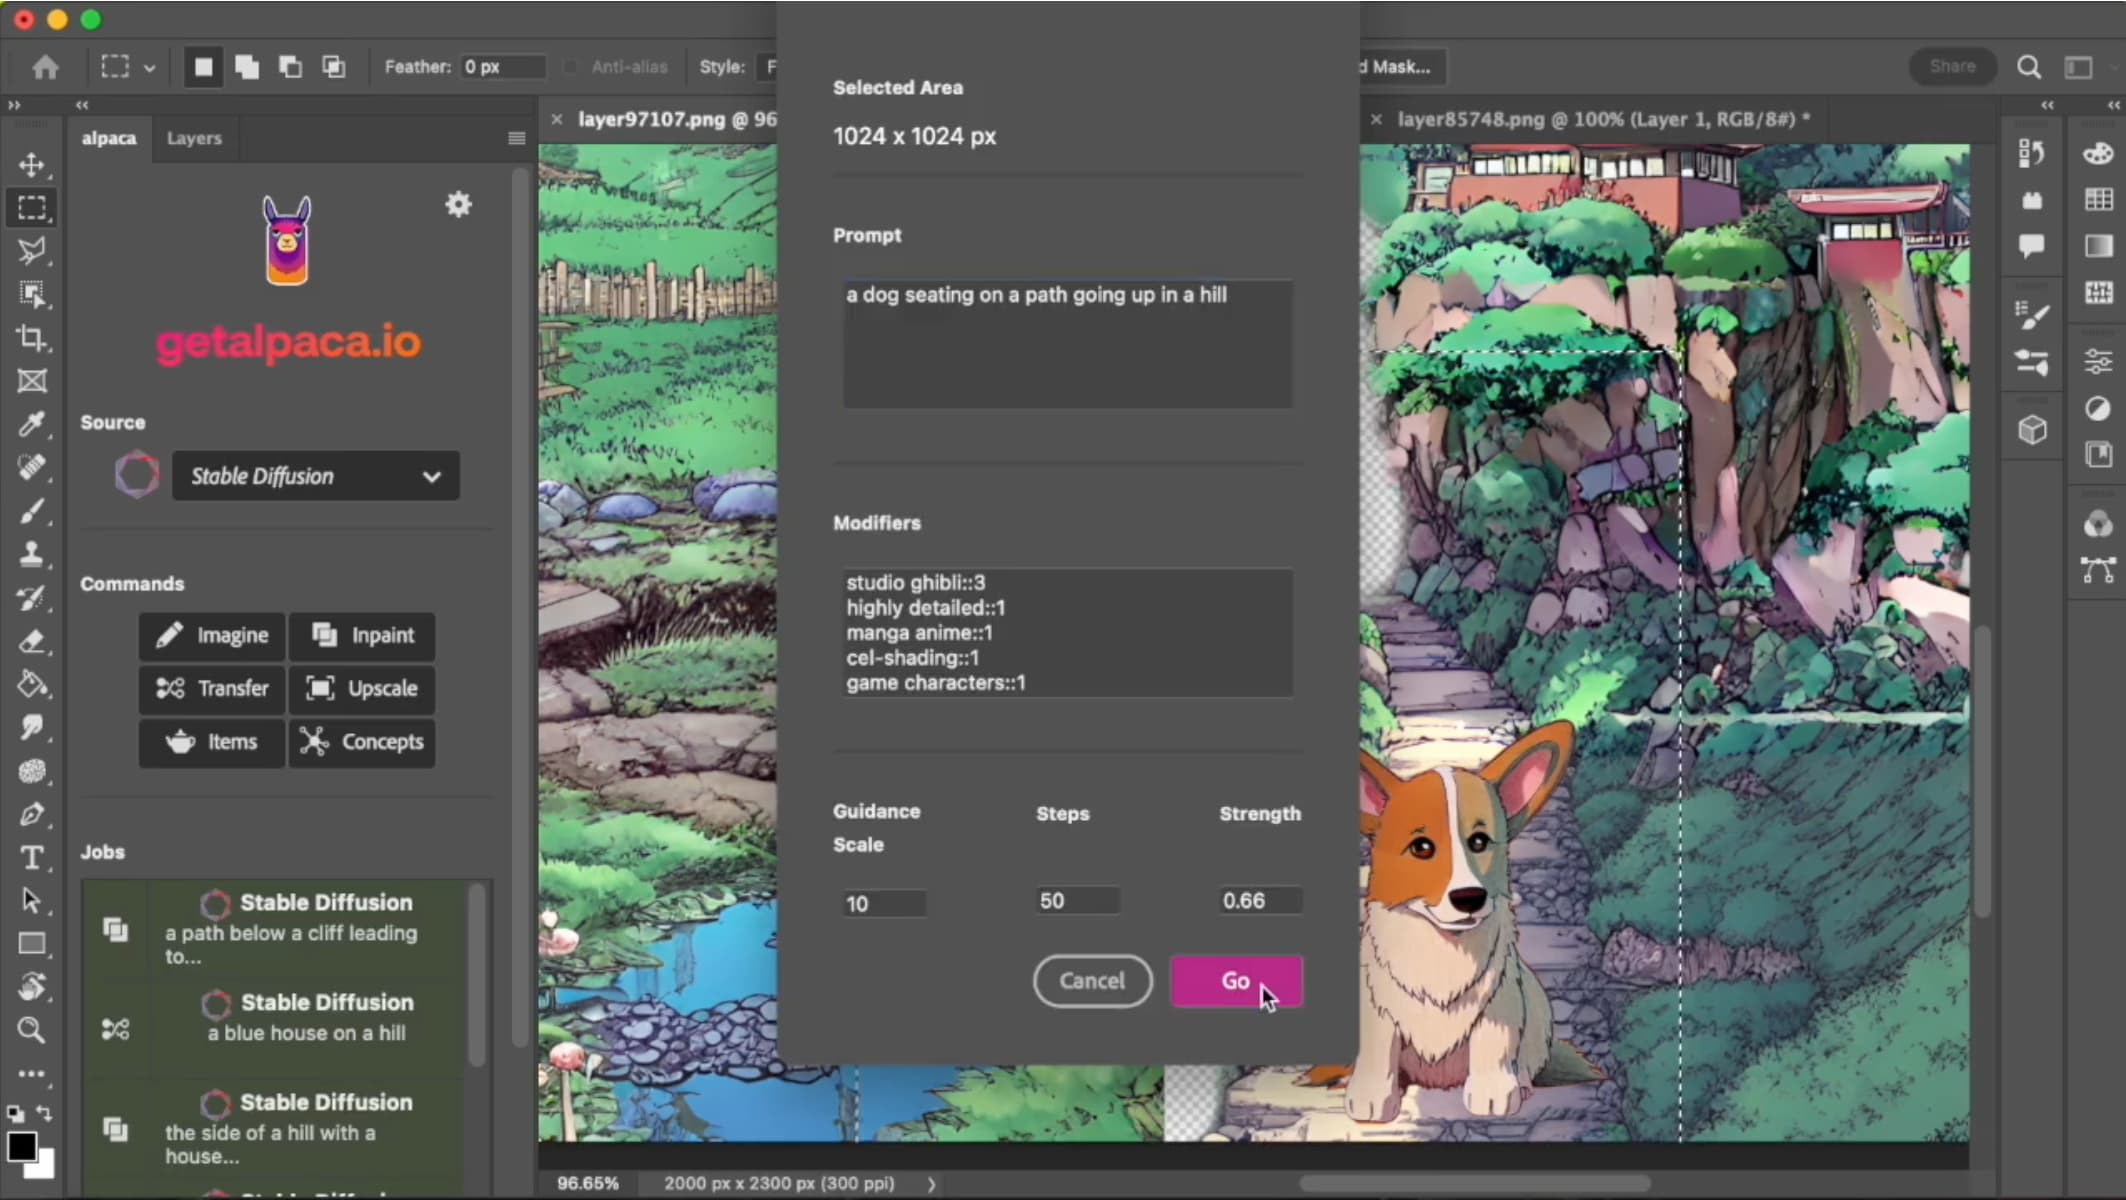 A screenshot of Photoshop - a complex image on multiple layers is shown in the background. The user has open a dialog where they have entered the prompt "a dog seating on a path going up in a hill" - with modifiers of "studio ghibli::3", "highly detailed::1", "mang anime::1", "cel-shading::1" and "game characters::1".